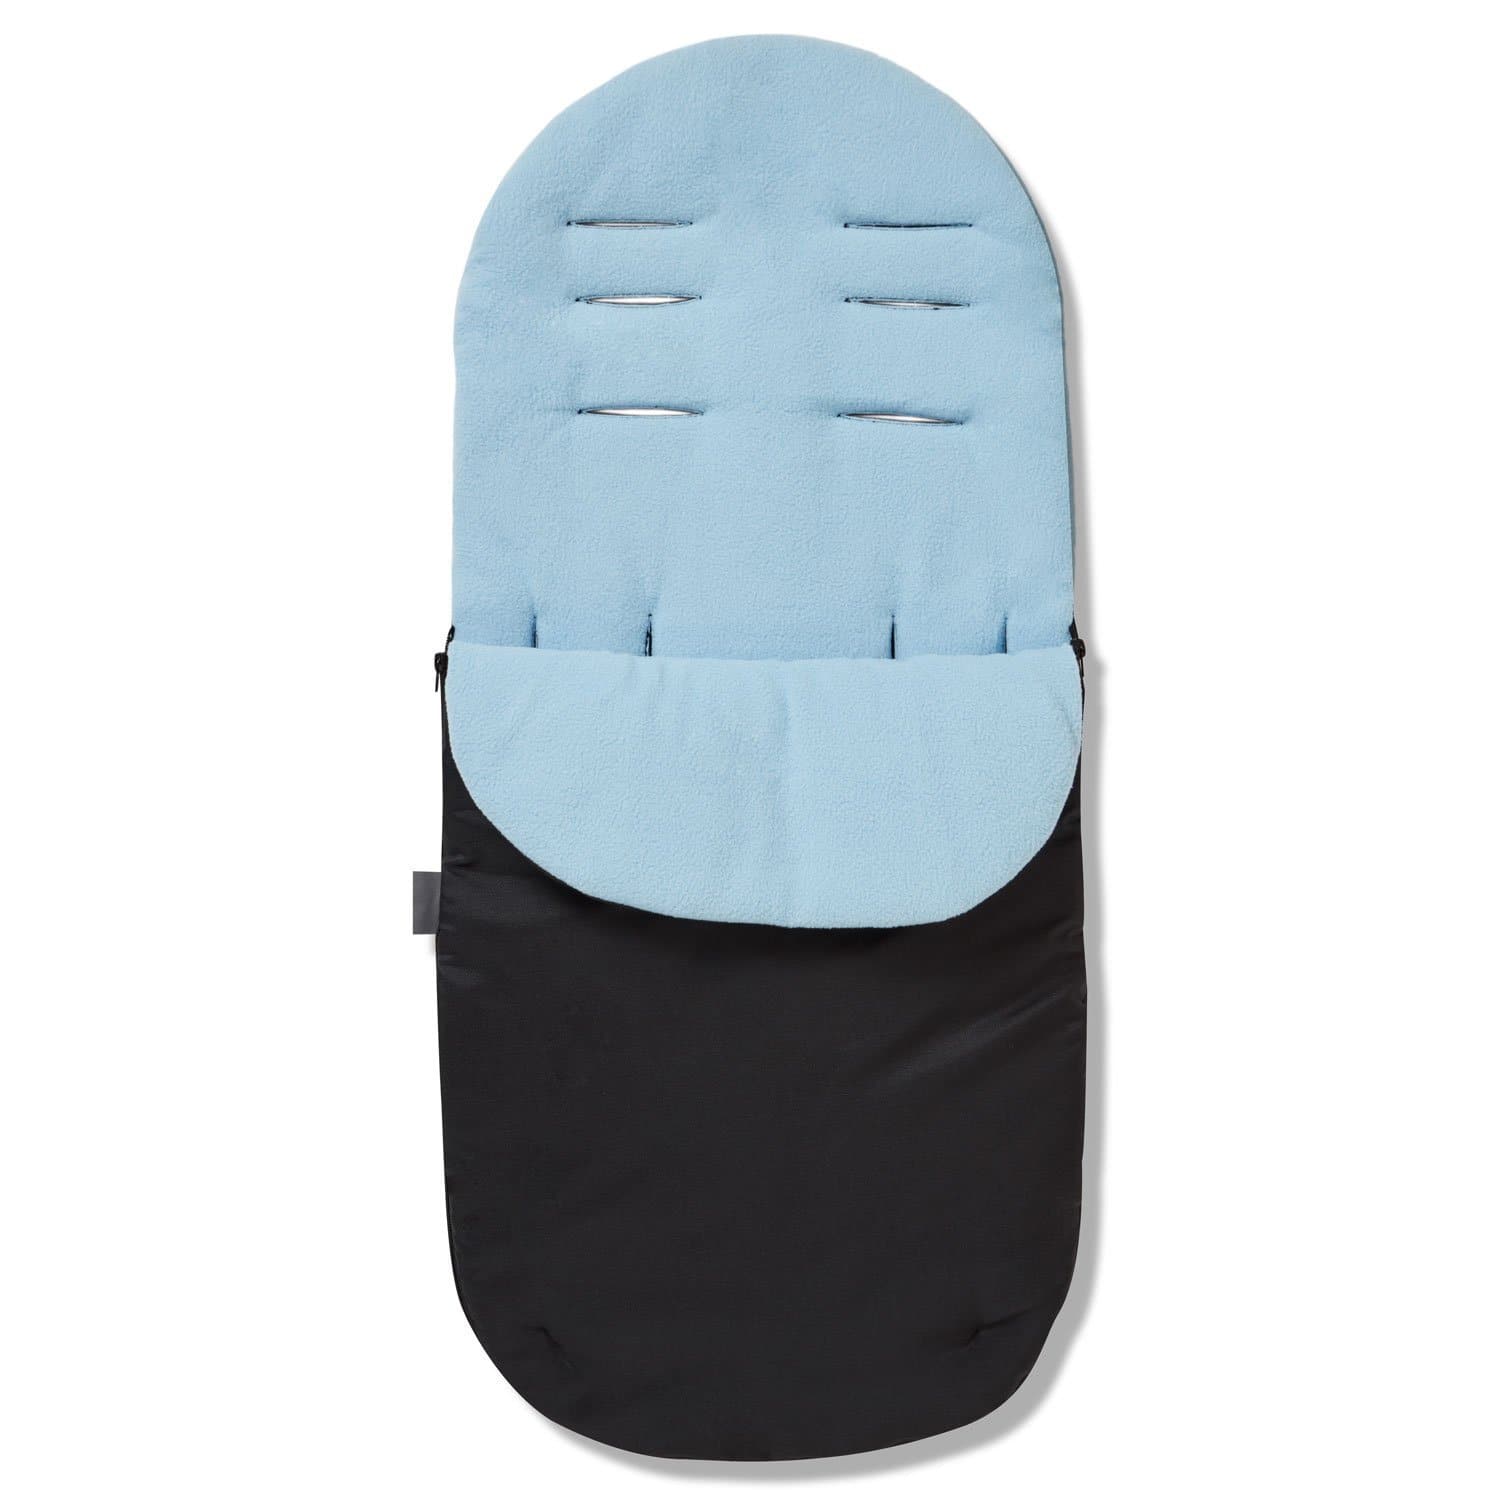 Footmuff / Cosy Toes Compatible with Red Kite - Light Blue / Fits All Models | For Your Little One